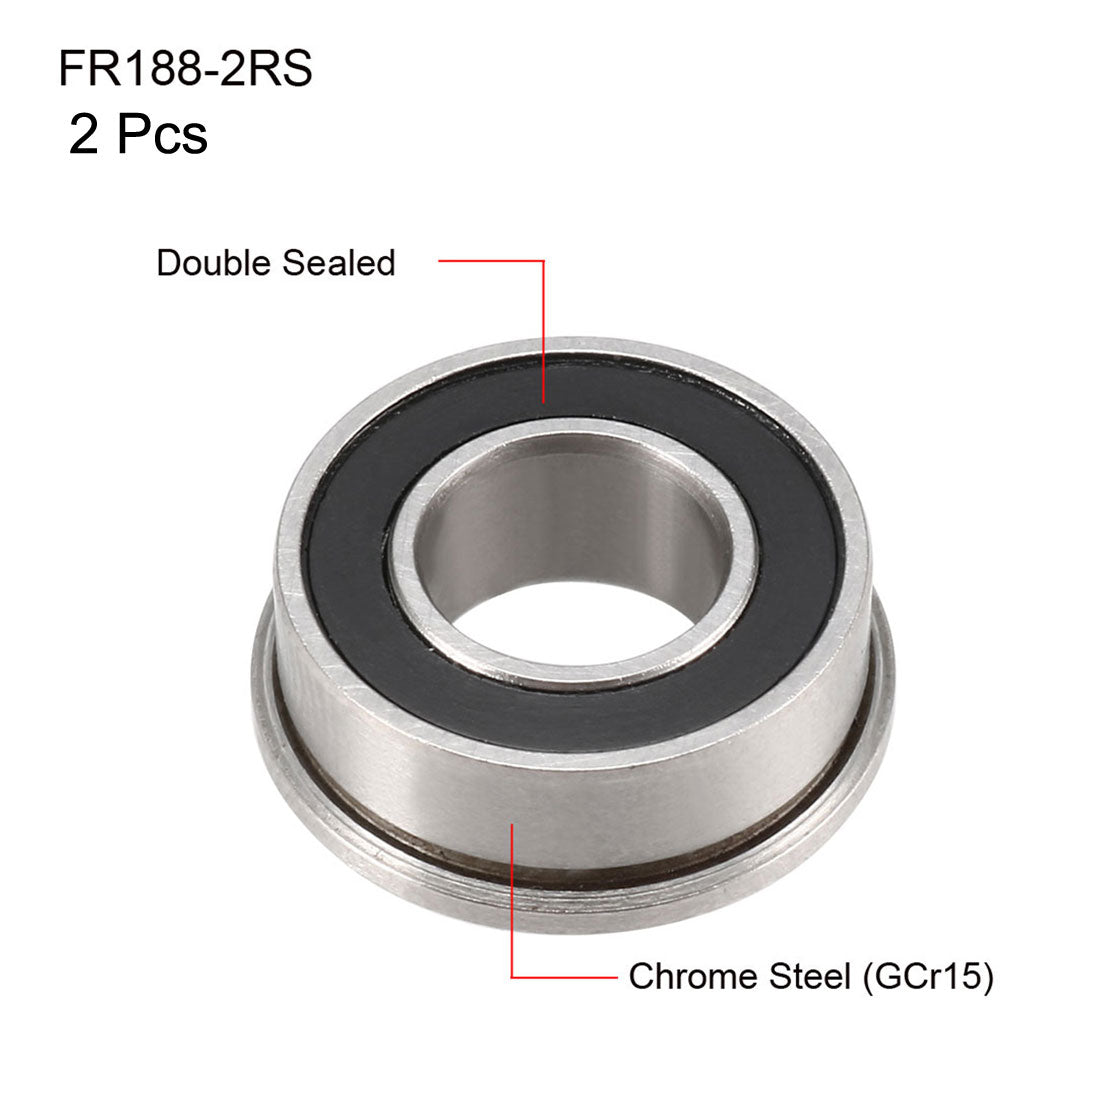 uxcell Uxcell FR188-2RS Flange Ball 1/4" x 1/2" x 3/16" Double Sealed (GCr15) Chrome Steel Bearings 2pcs